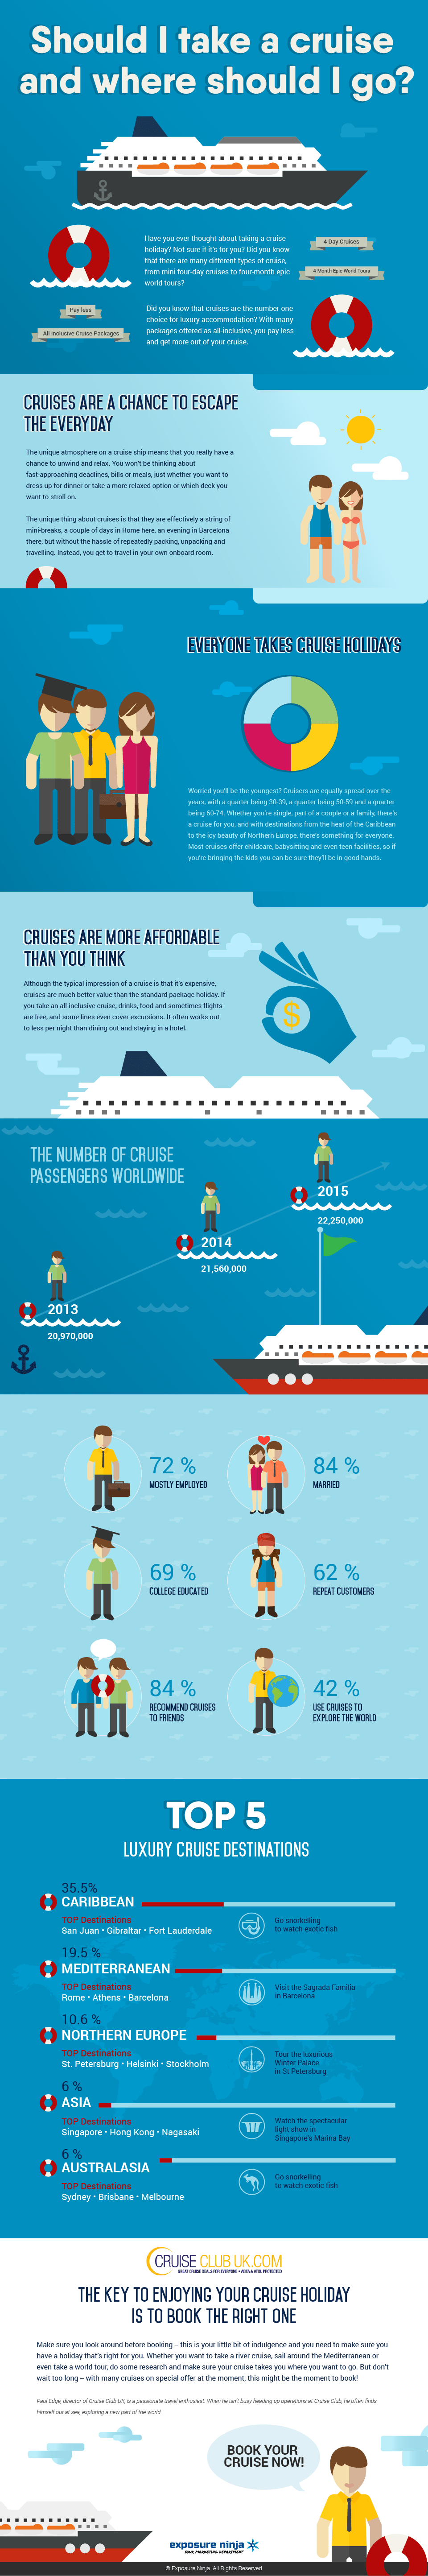 Should I Take A Cruise Infographic